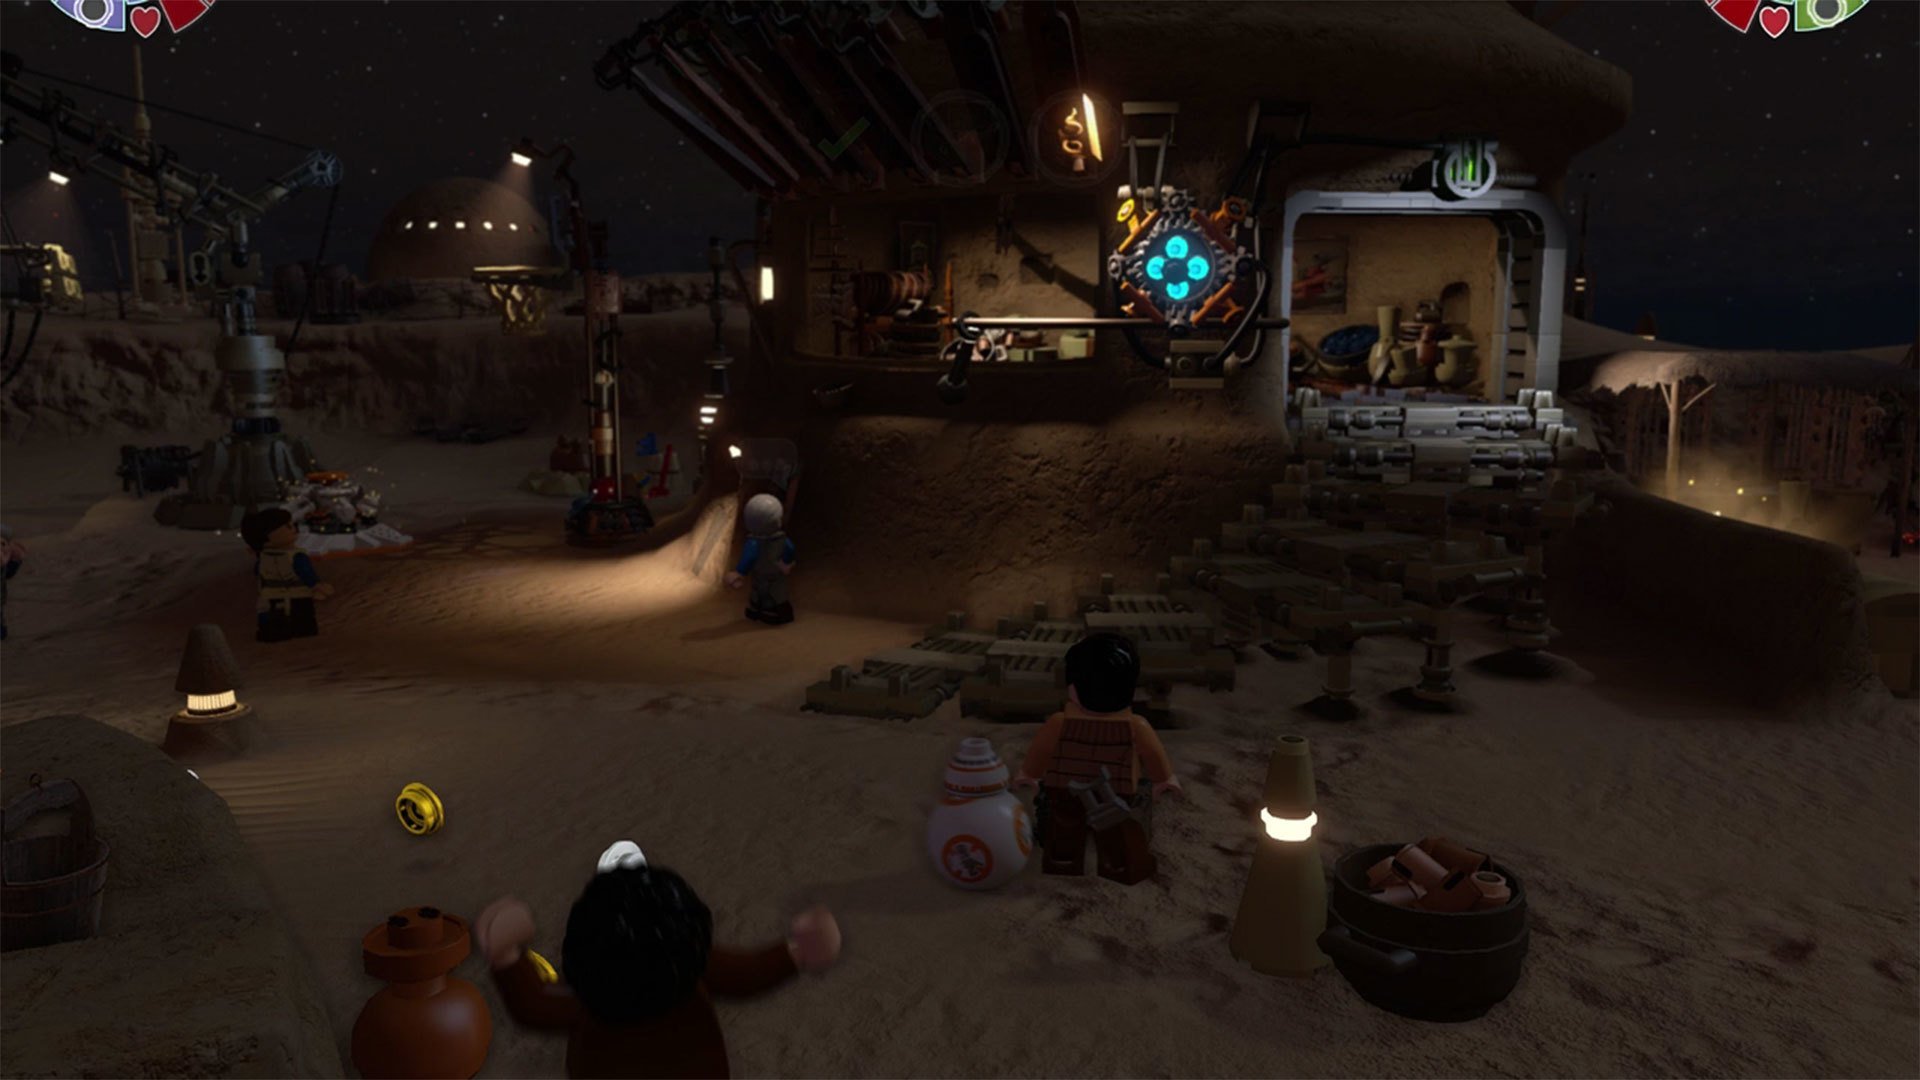 ‘Lego Star Wars: The Force Awakens’ demo now available for Xbox One